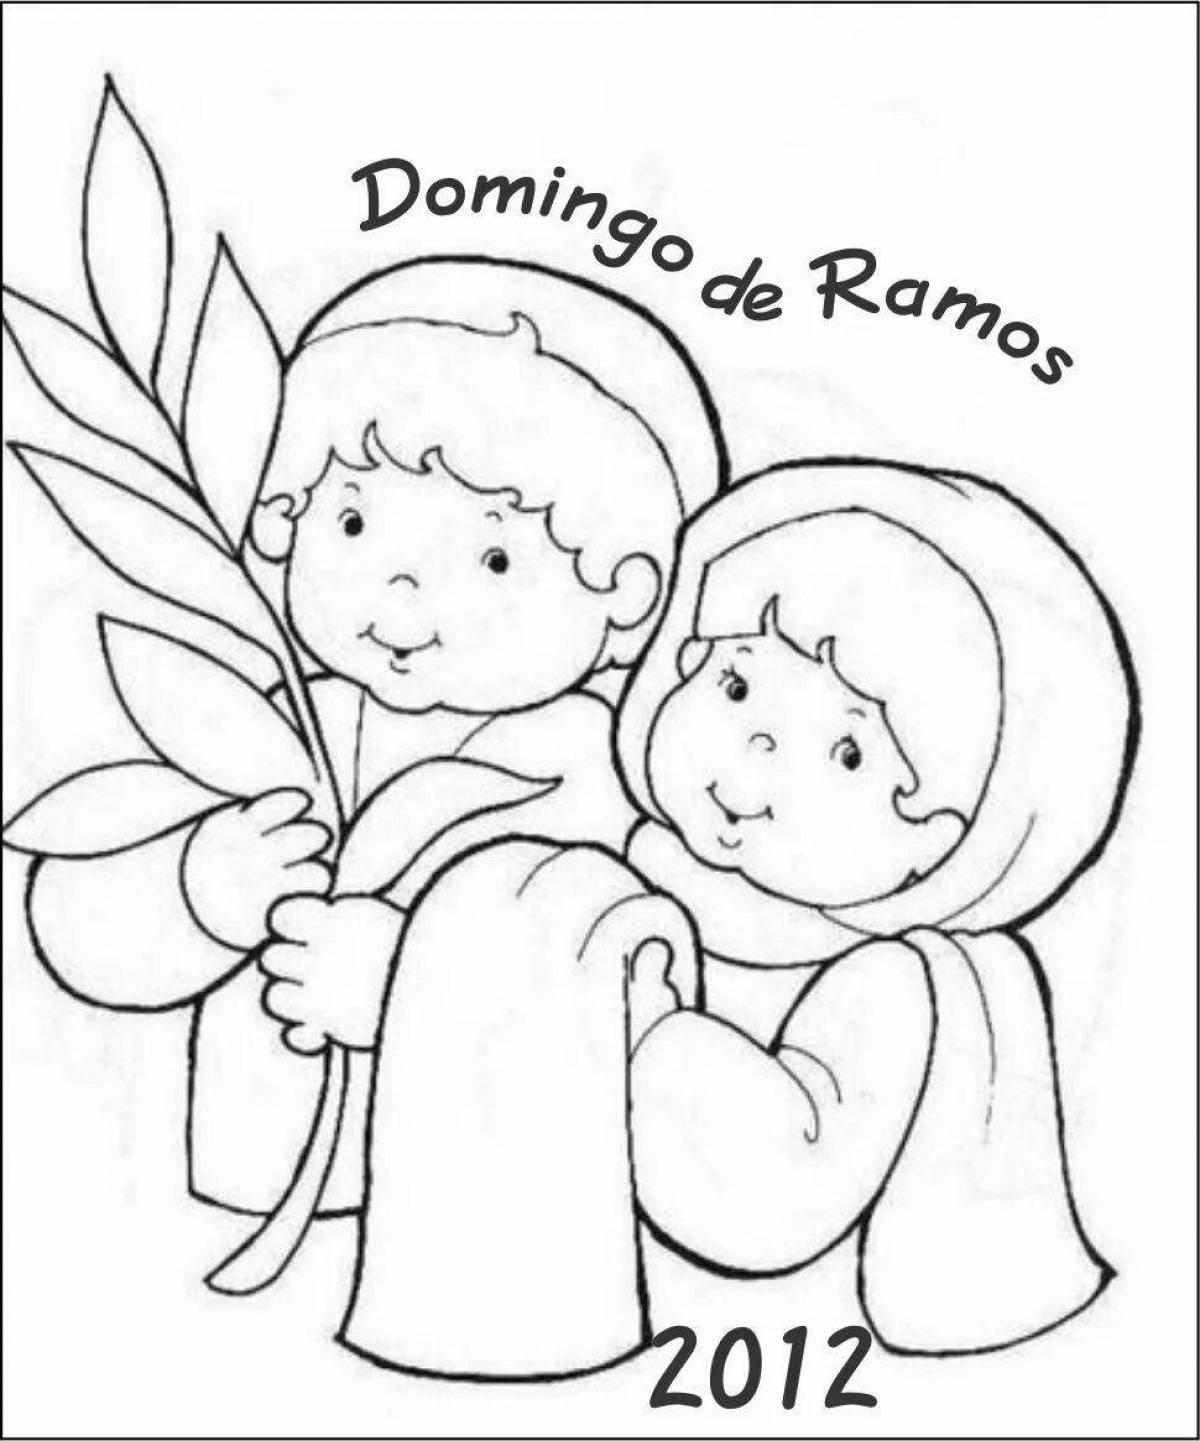 Playful orthodox coloring book